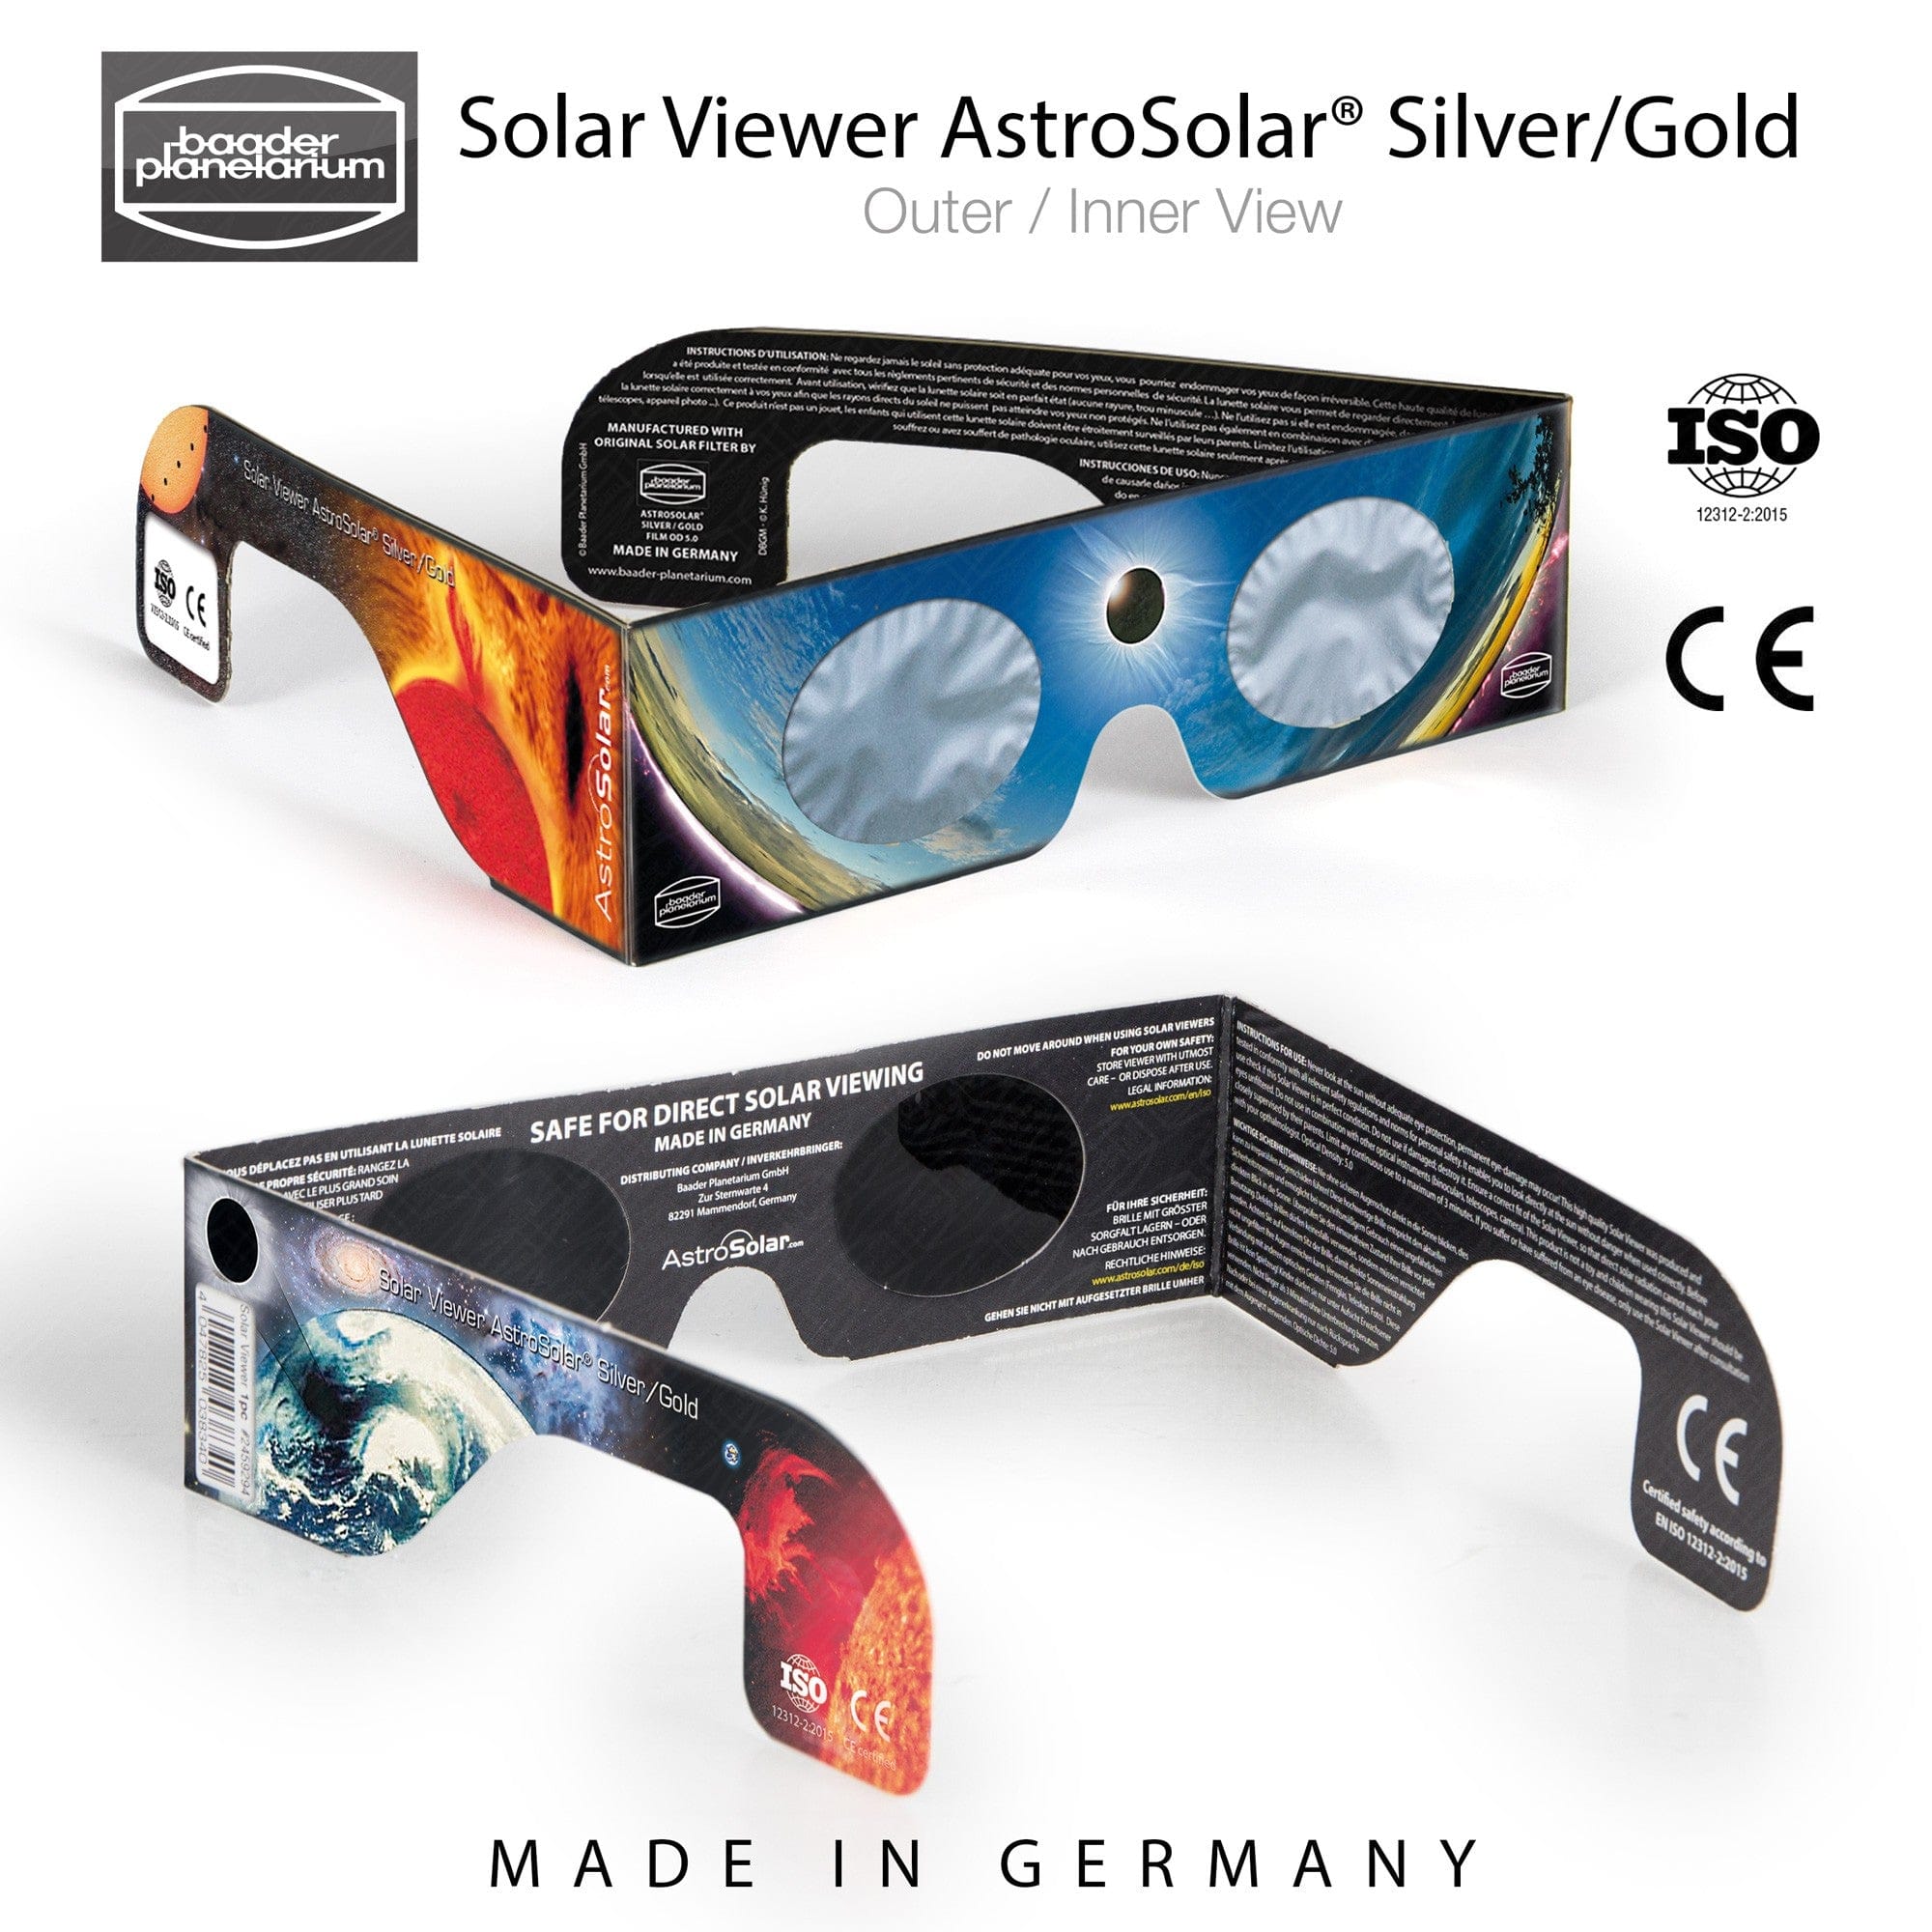 Baader Planetarium Accessory Baader Solar Viewer AstroSolar® Silver/Gold Eclipse Glasses (10pc bundle packaging) - 2459295